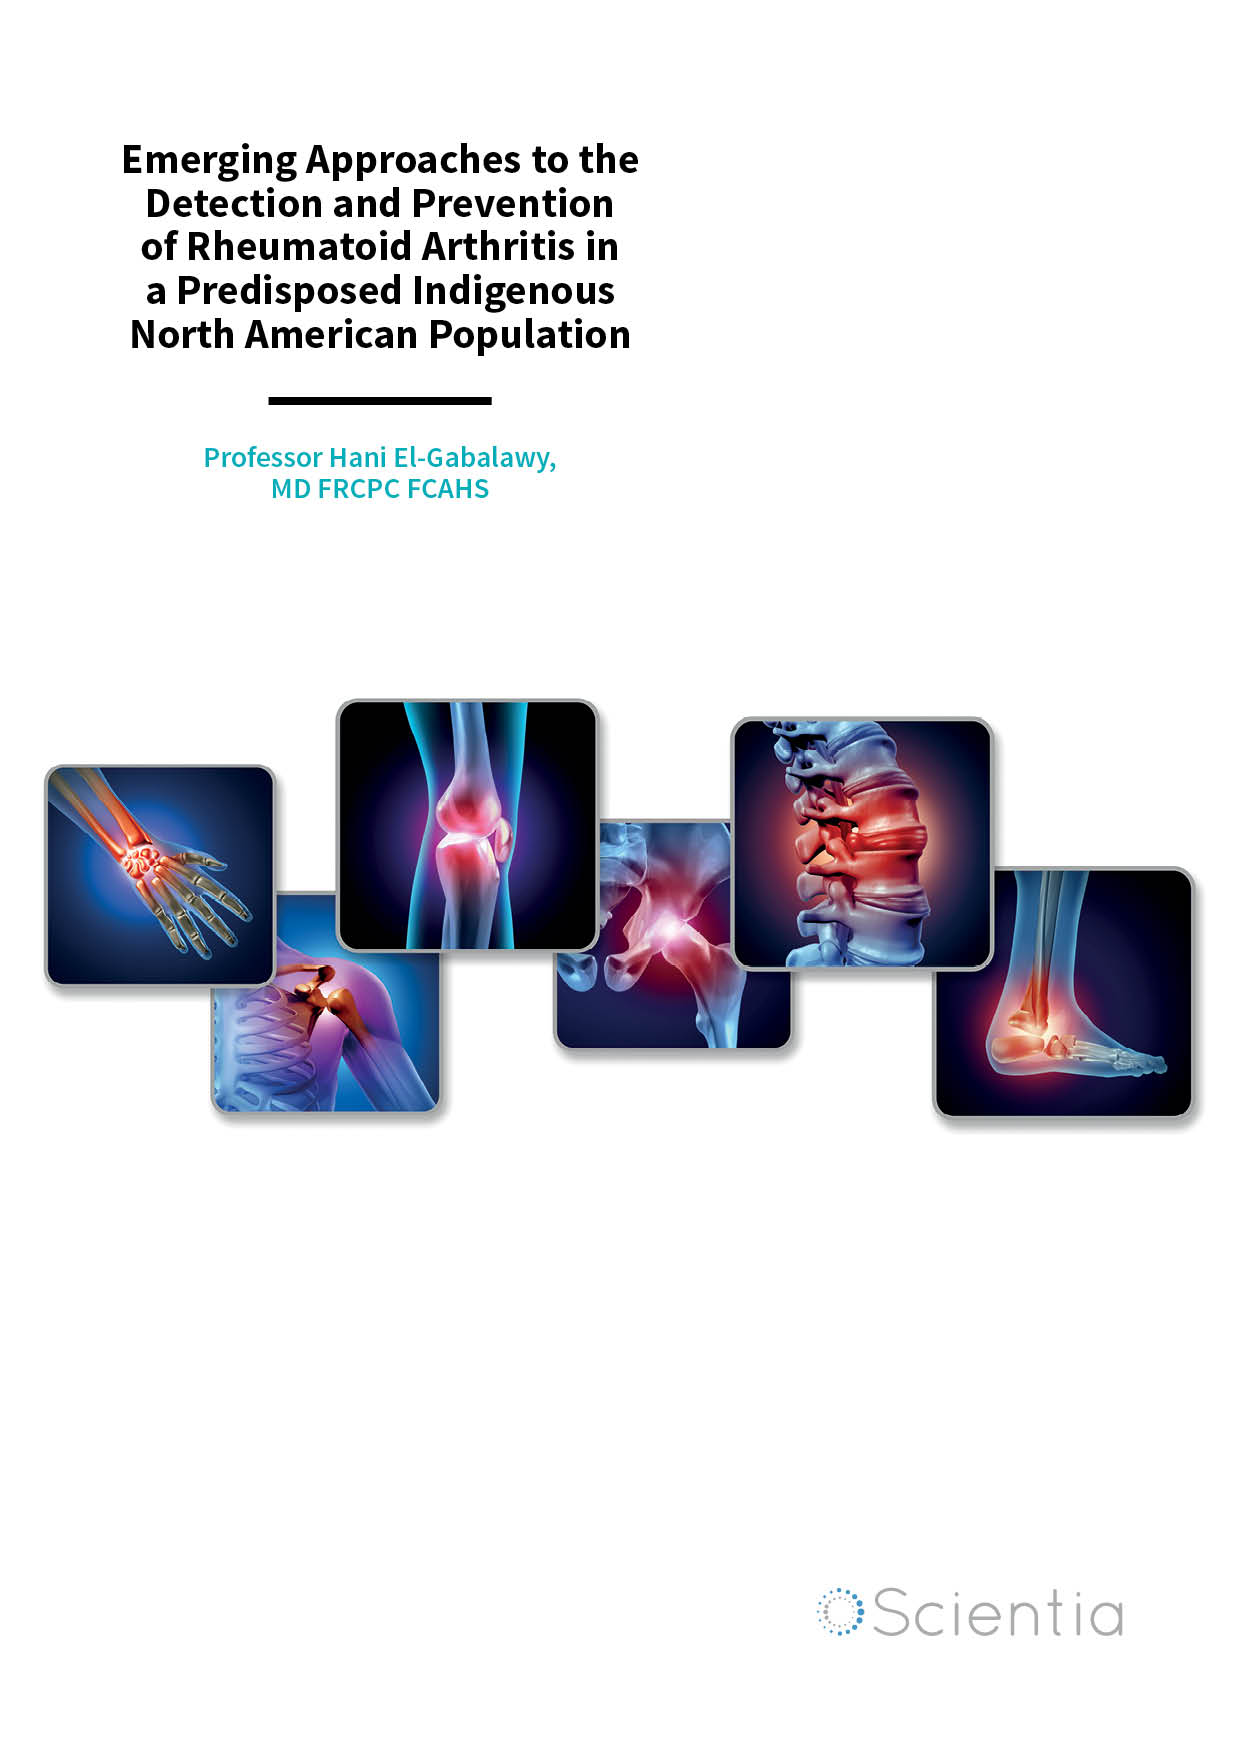 Professor Hani El-Gabalawy – Emerging Approaches to the Detection and Prevention of Rheumatoid Arthritis in a Predisposed Indigenous North American Population